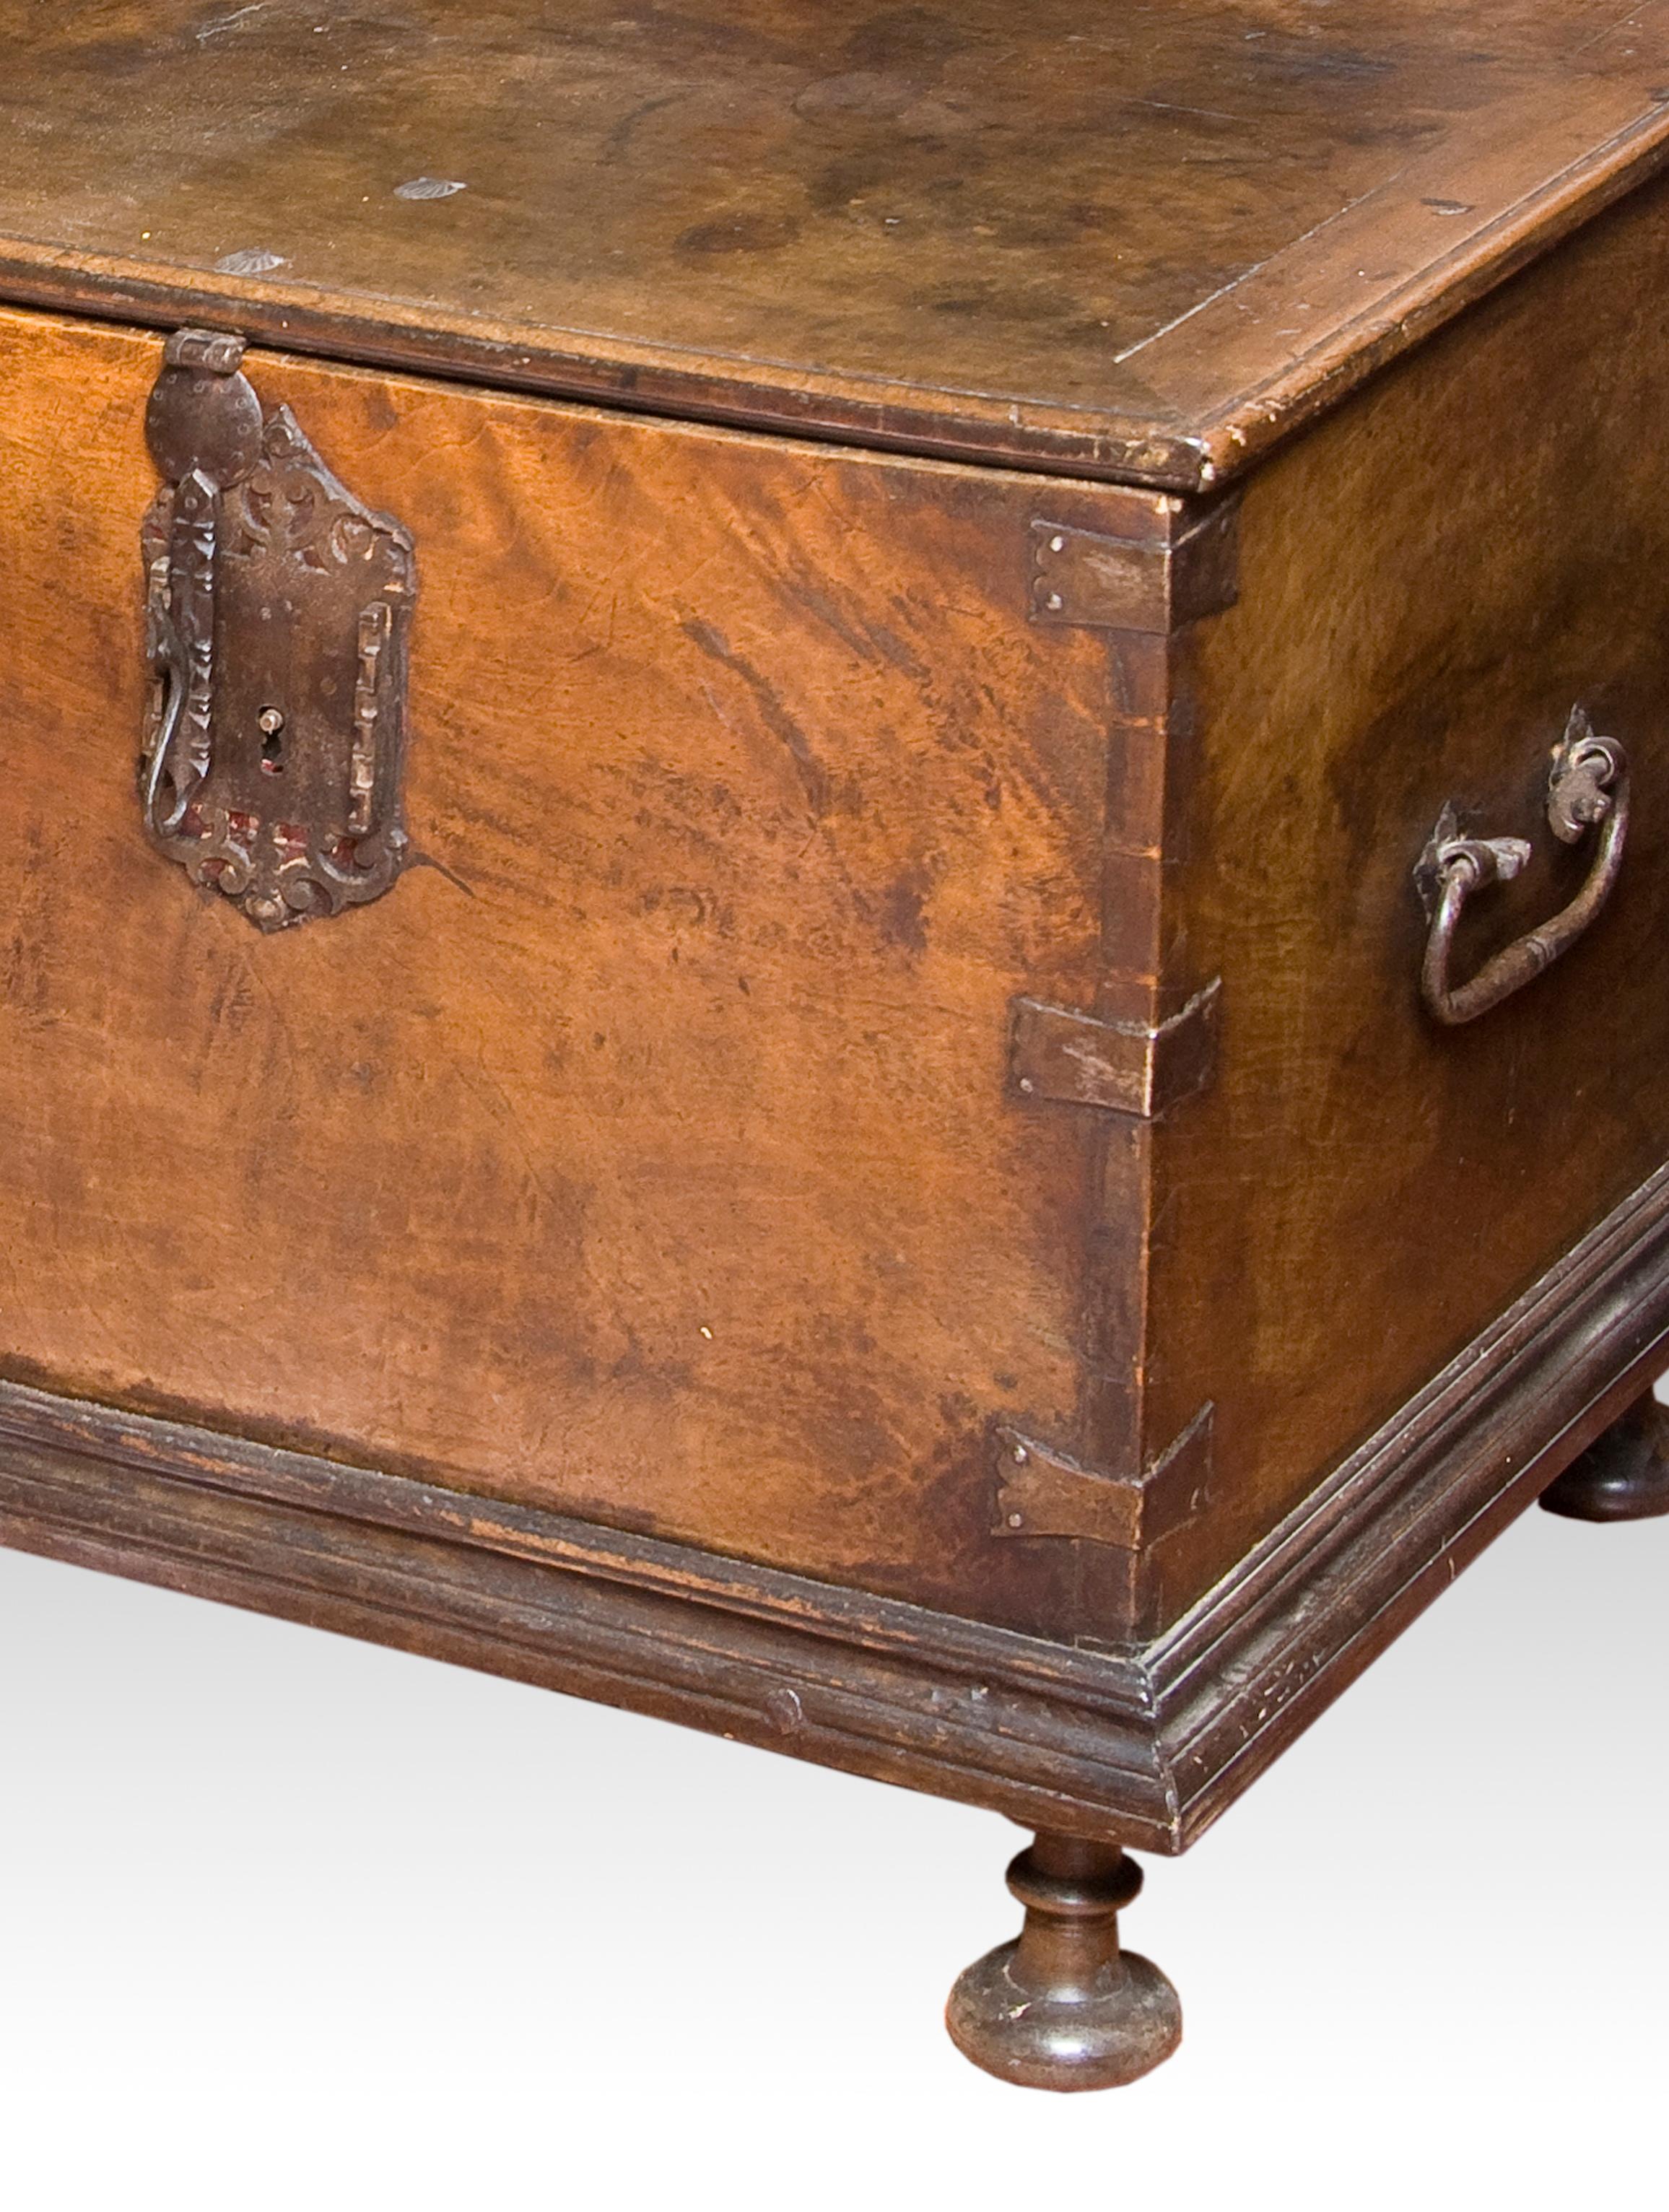 Council or city hall chest. Walnut, wrought iron, Spain, 17th century with restorations.
Rectangular ark of flat top with two handles, corners, turned legs and three locks whose lock shields respond to two styles: the sides follow 17th-century